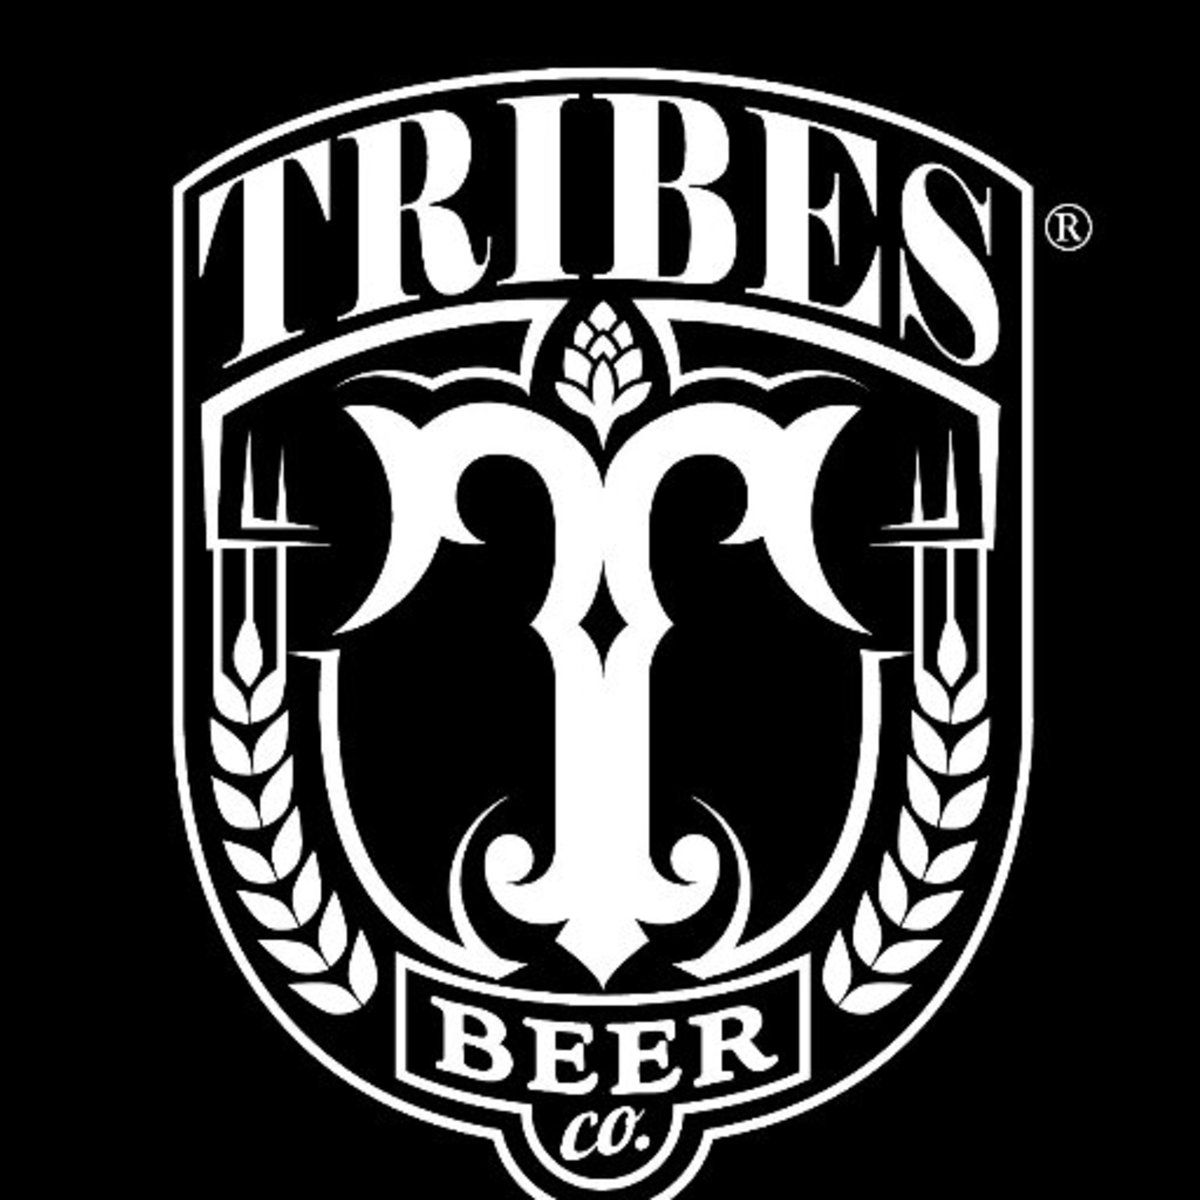 Illinois' breweries Tribes Beer Company